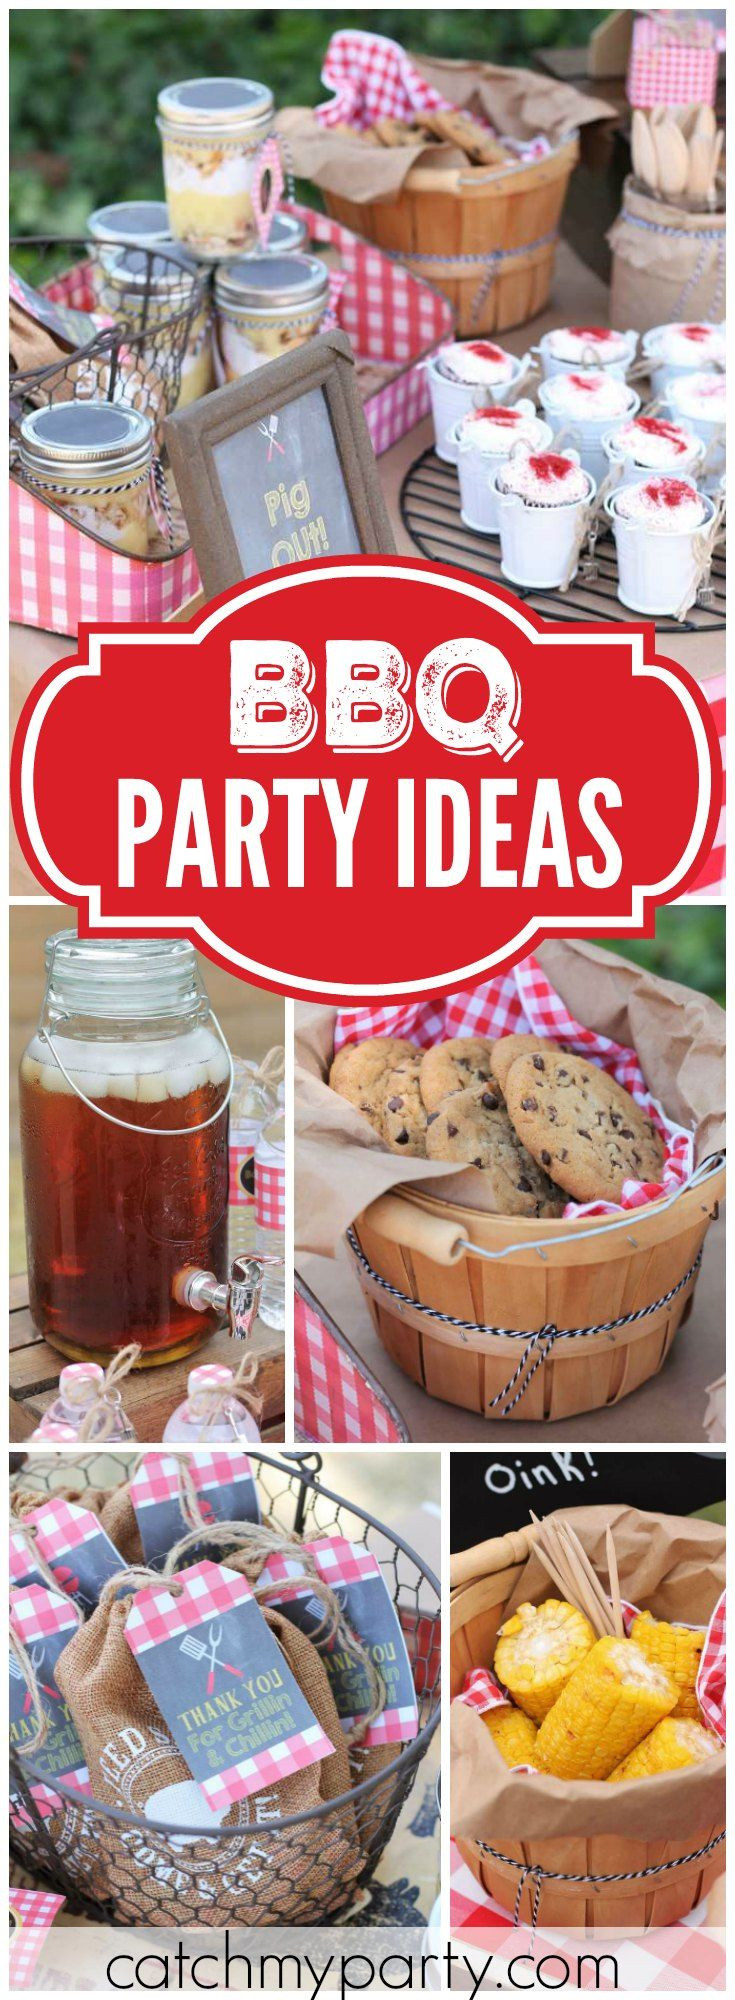 Pinterest Backyard Bbq Engagement Party Ideas
 How great is this patriotic backyard summer BBQ party See